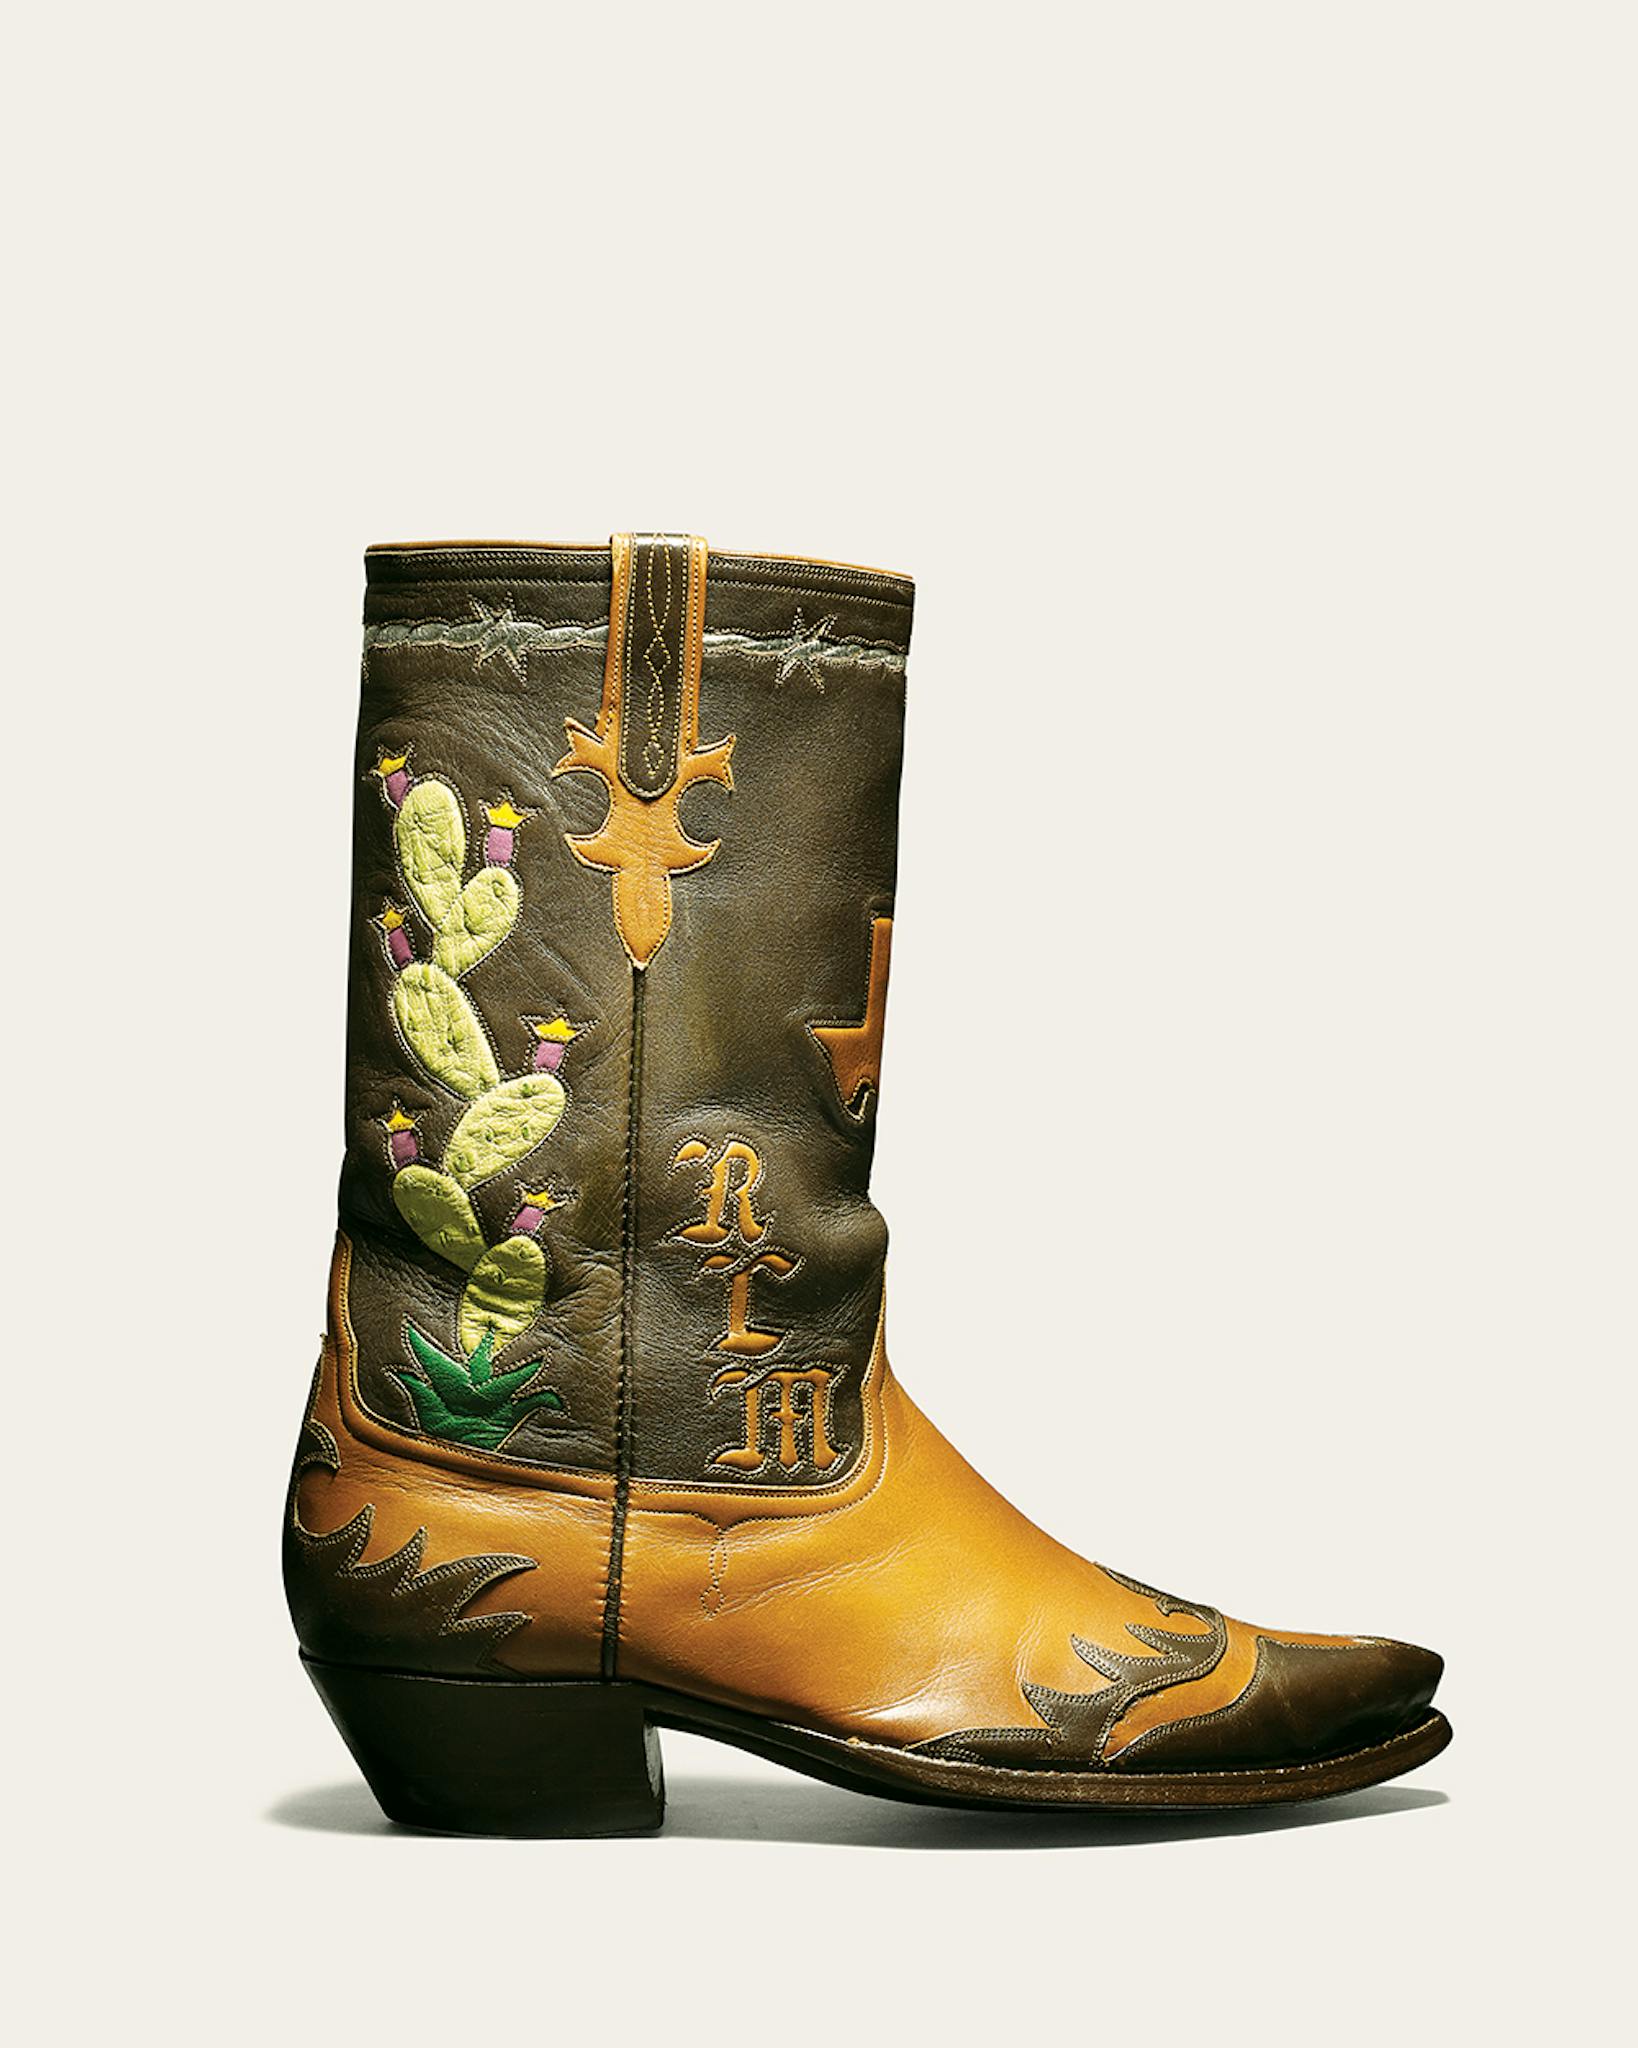 Texas Custom Boots short boot with cactus stitching.